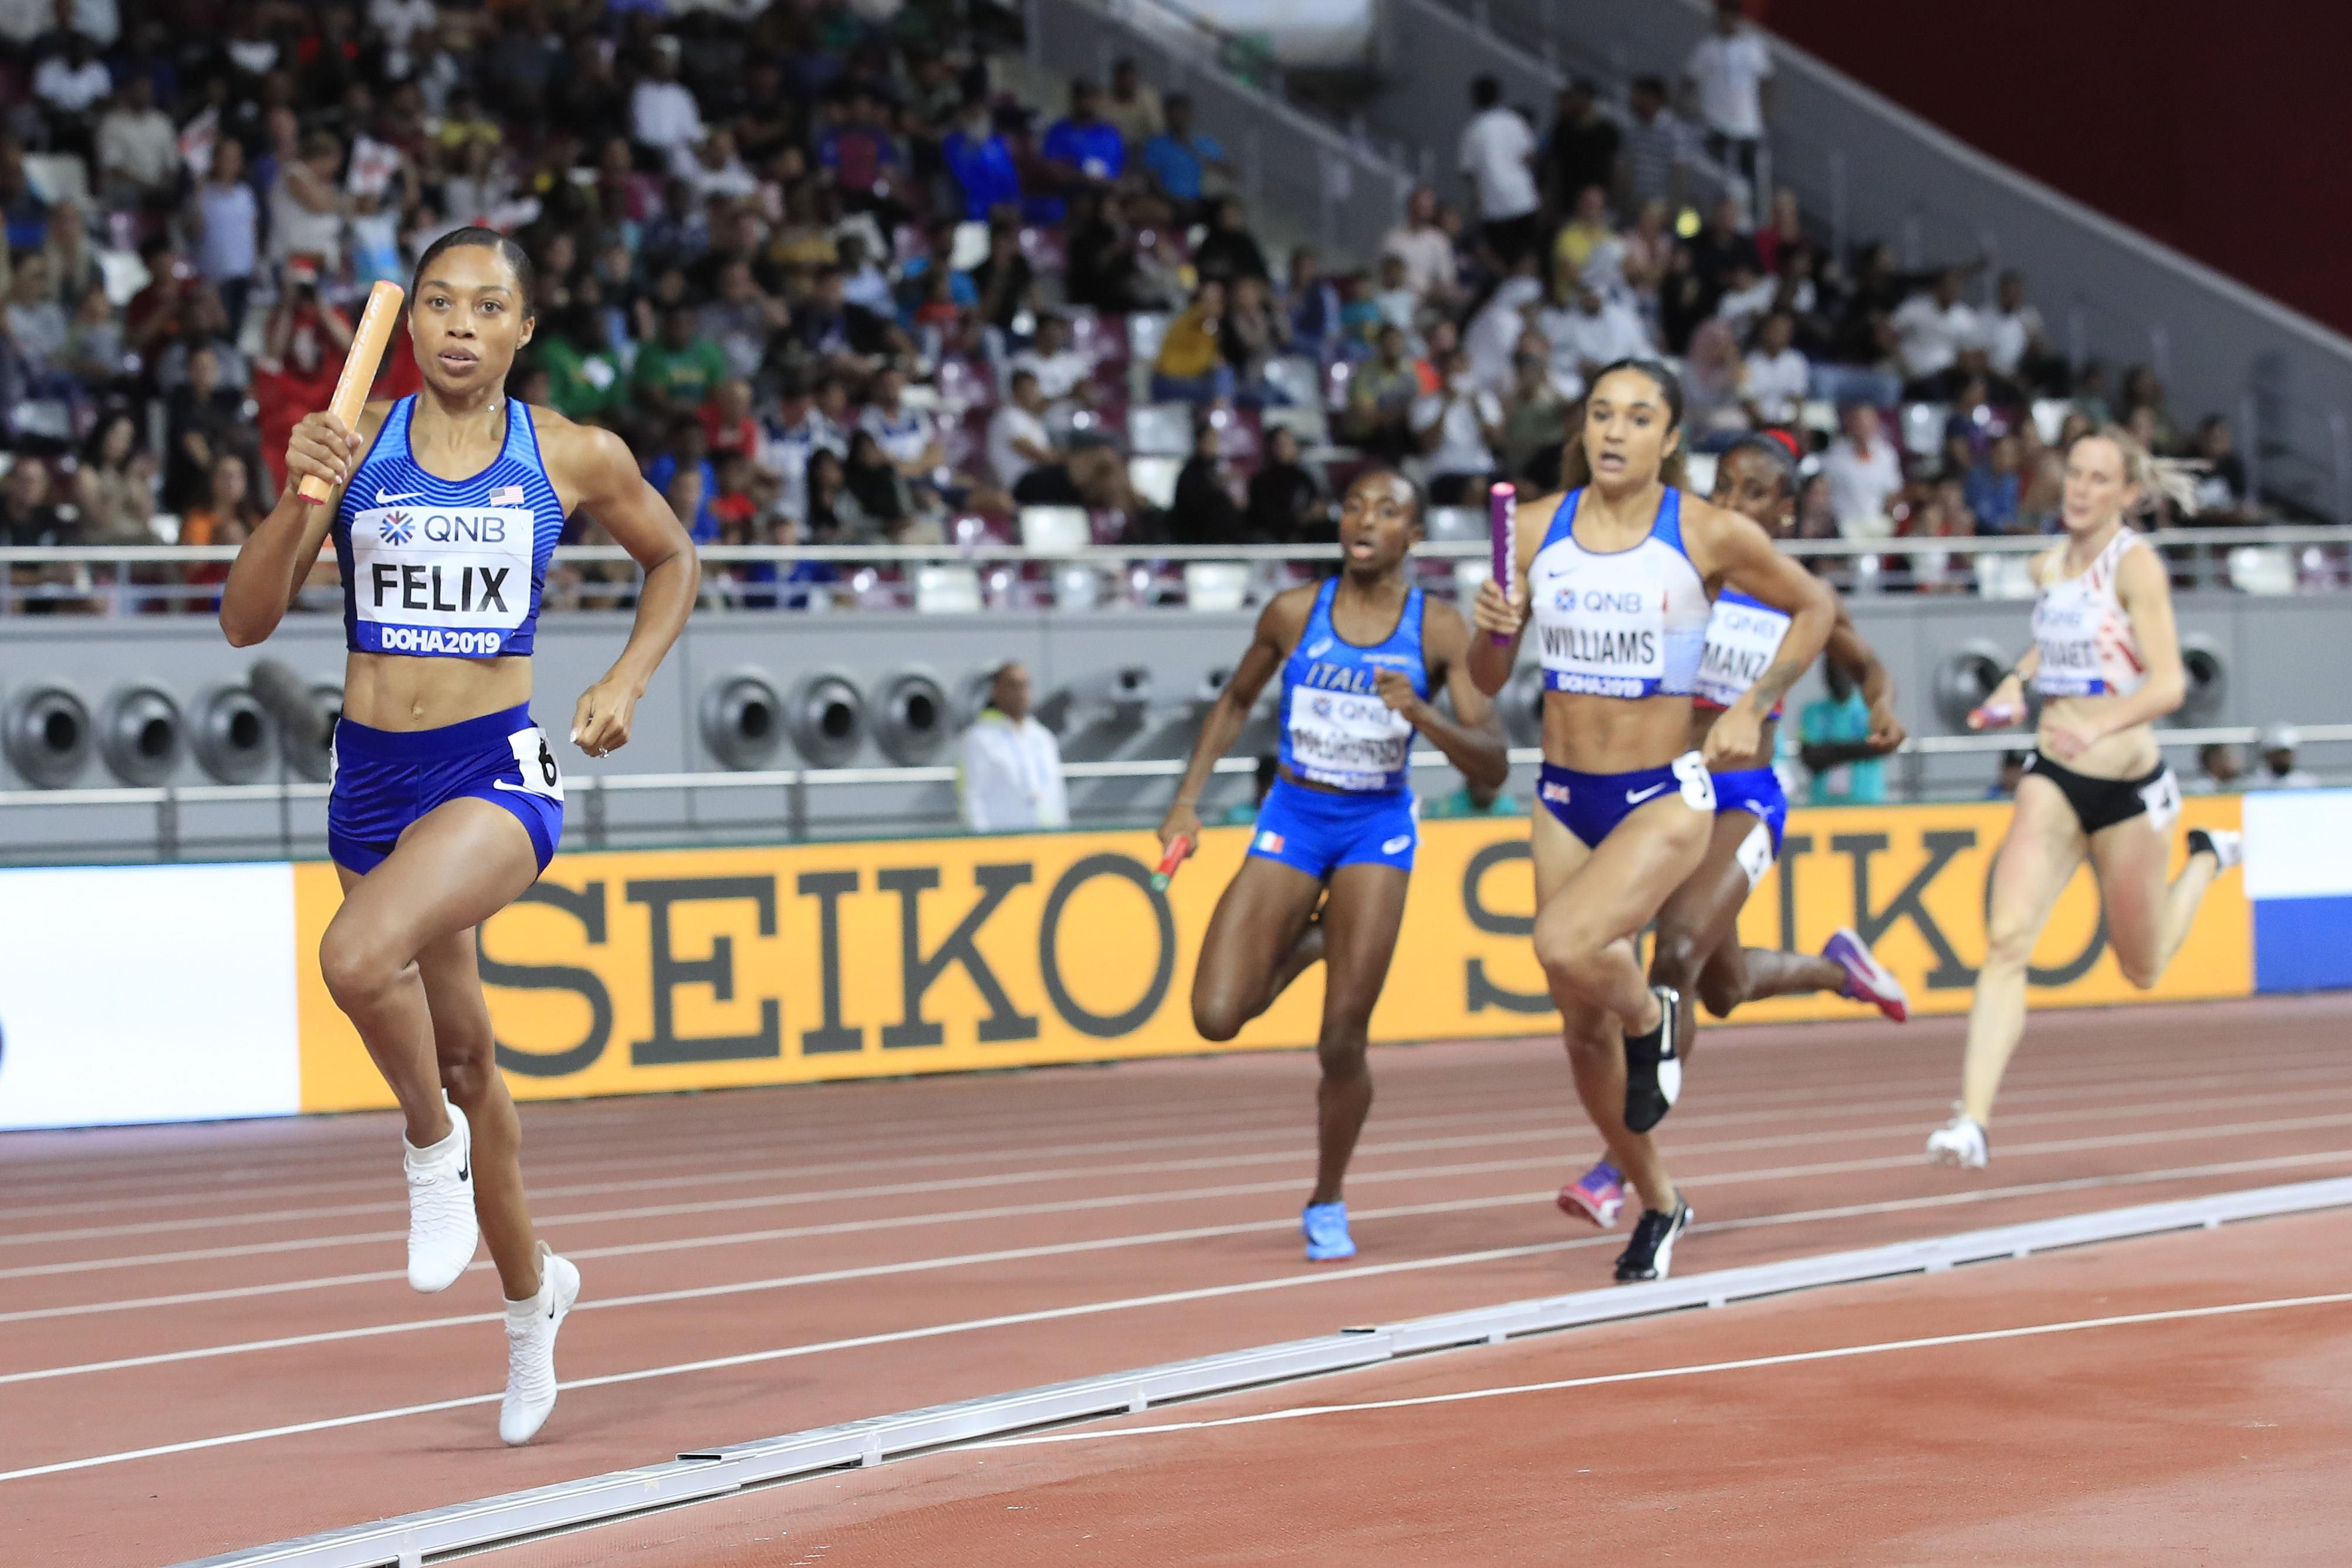 Allyson Felix in the opening round of the 4x400m relay at the IAAF World Athletics Championships Doha 2019